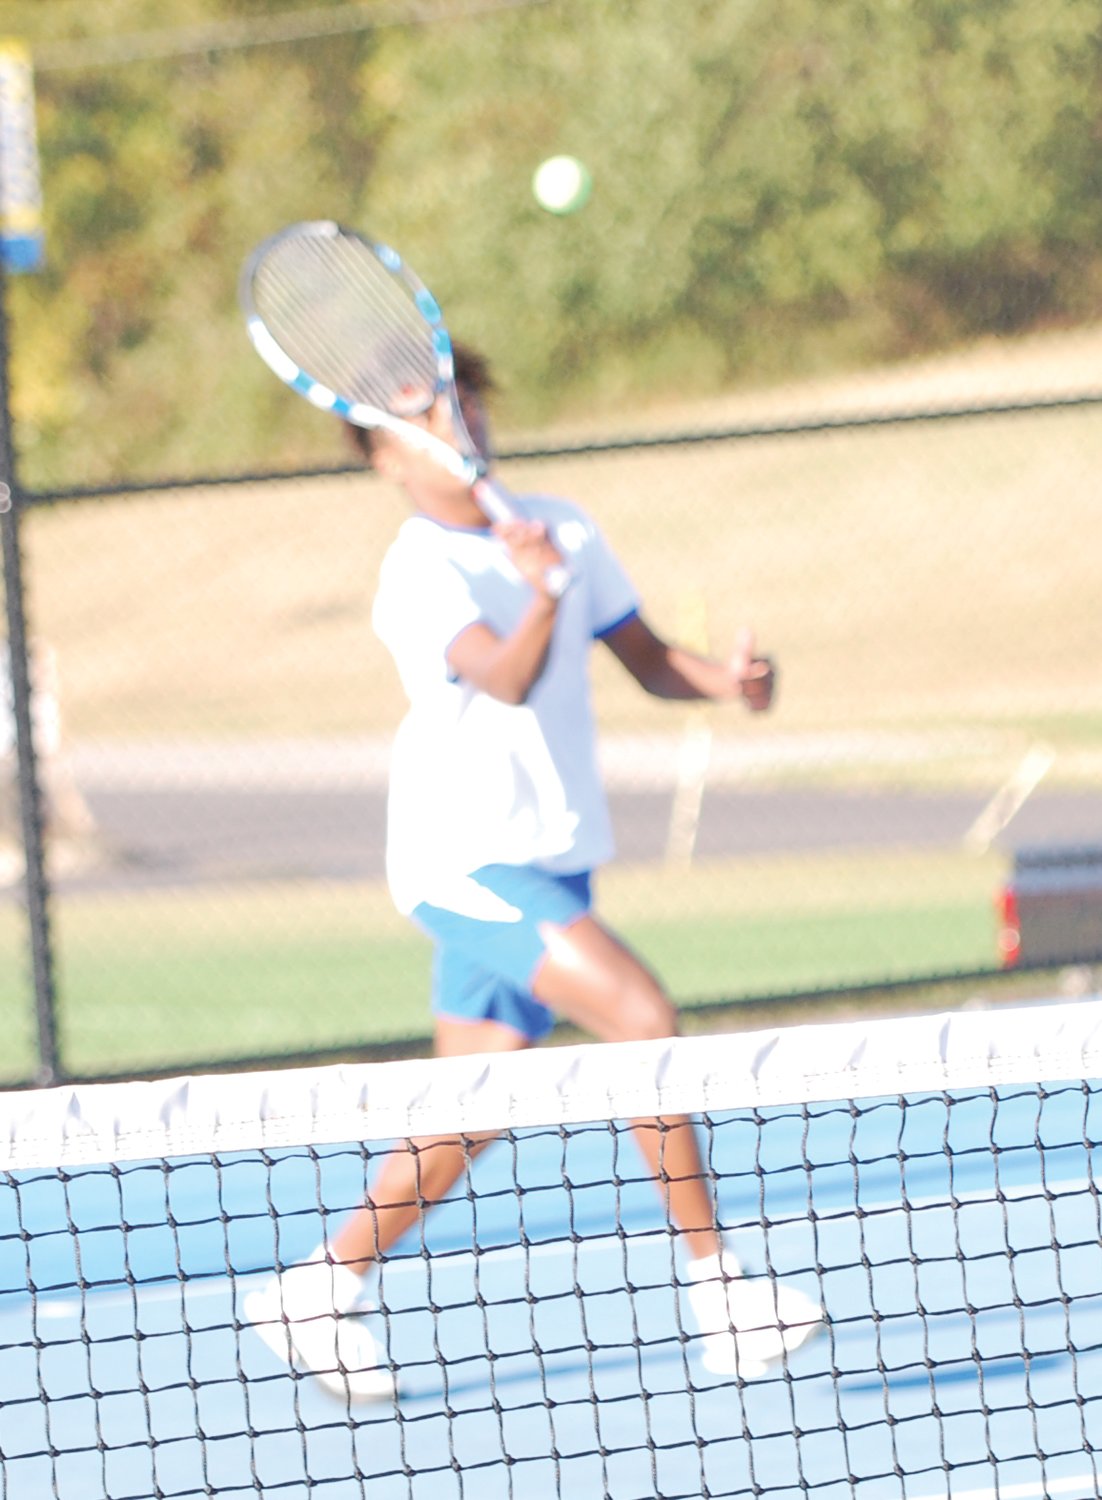 Crawfordsville’s Ziair Morgan returns a shot at No. 1 doubles for the Athenians on Wednesday against North Montgomery.